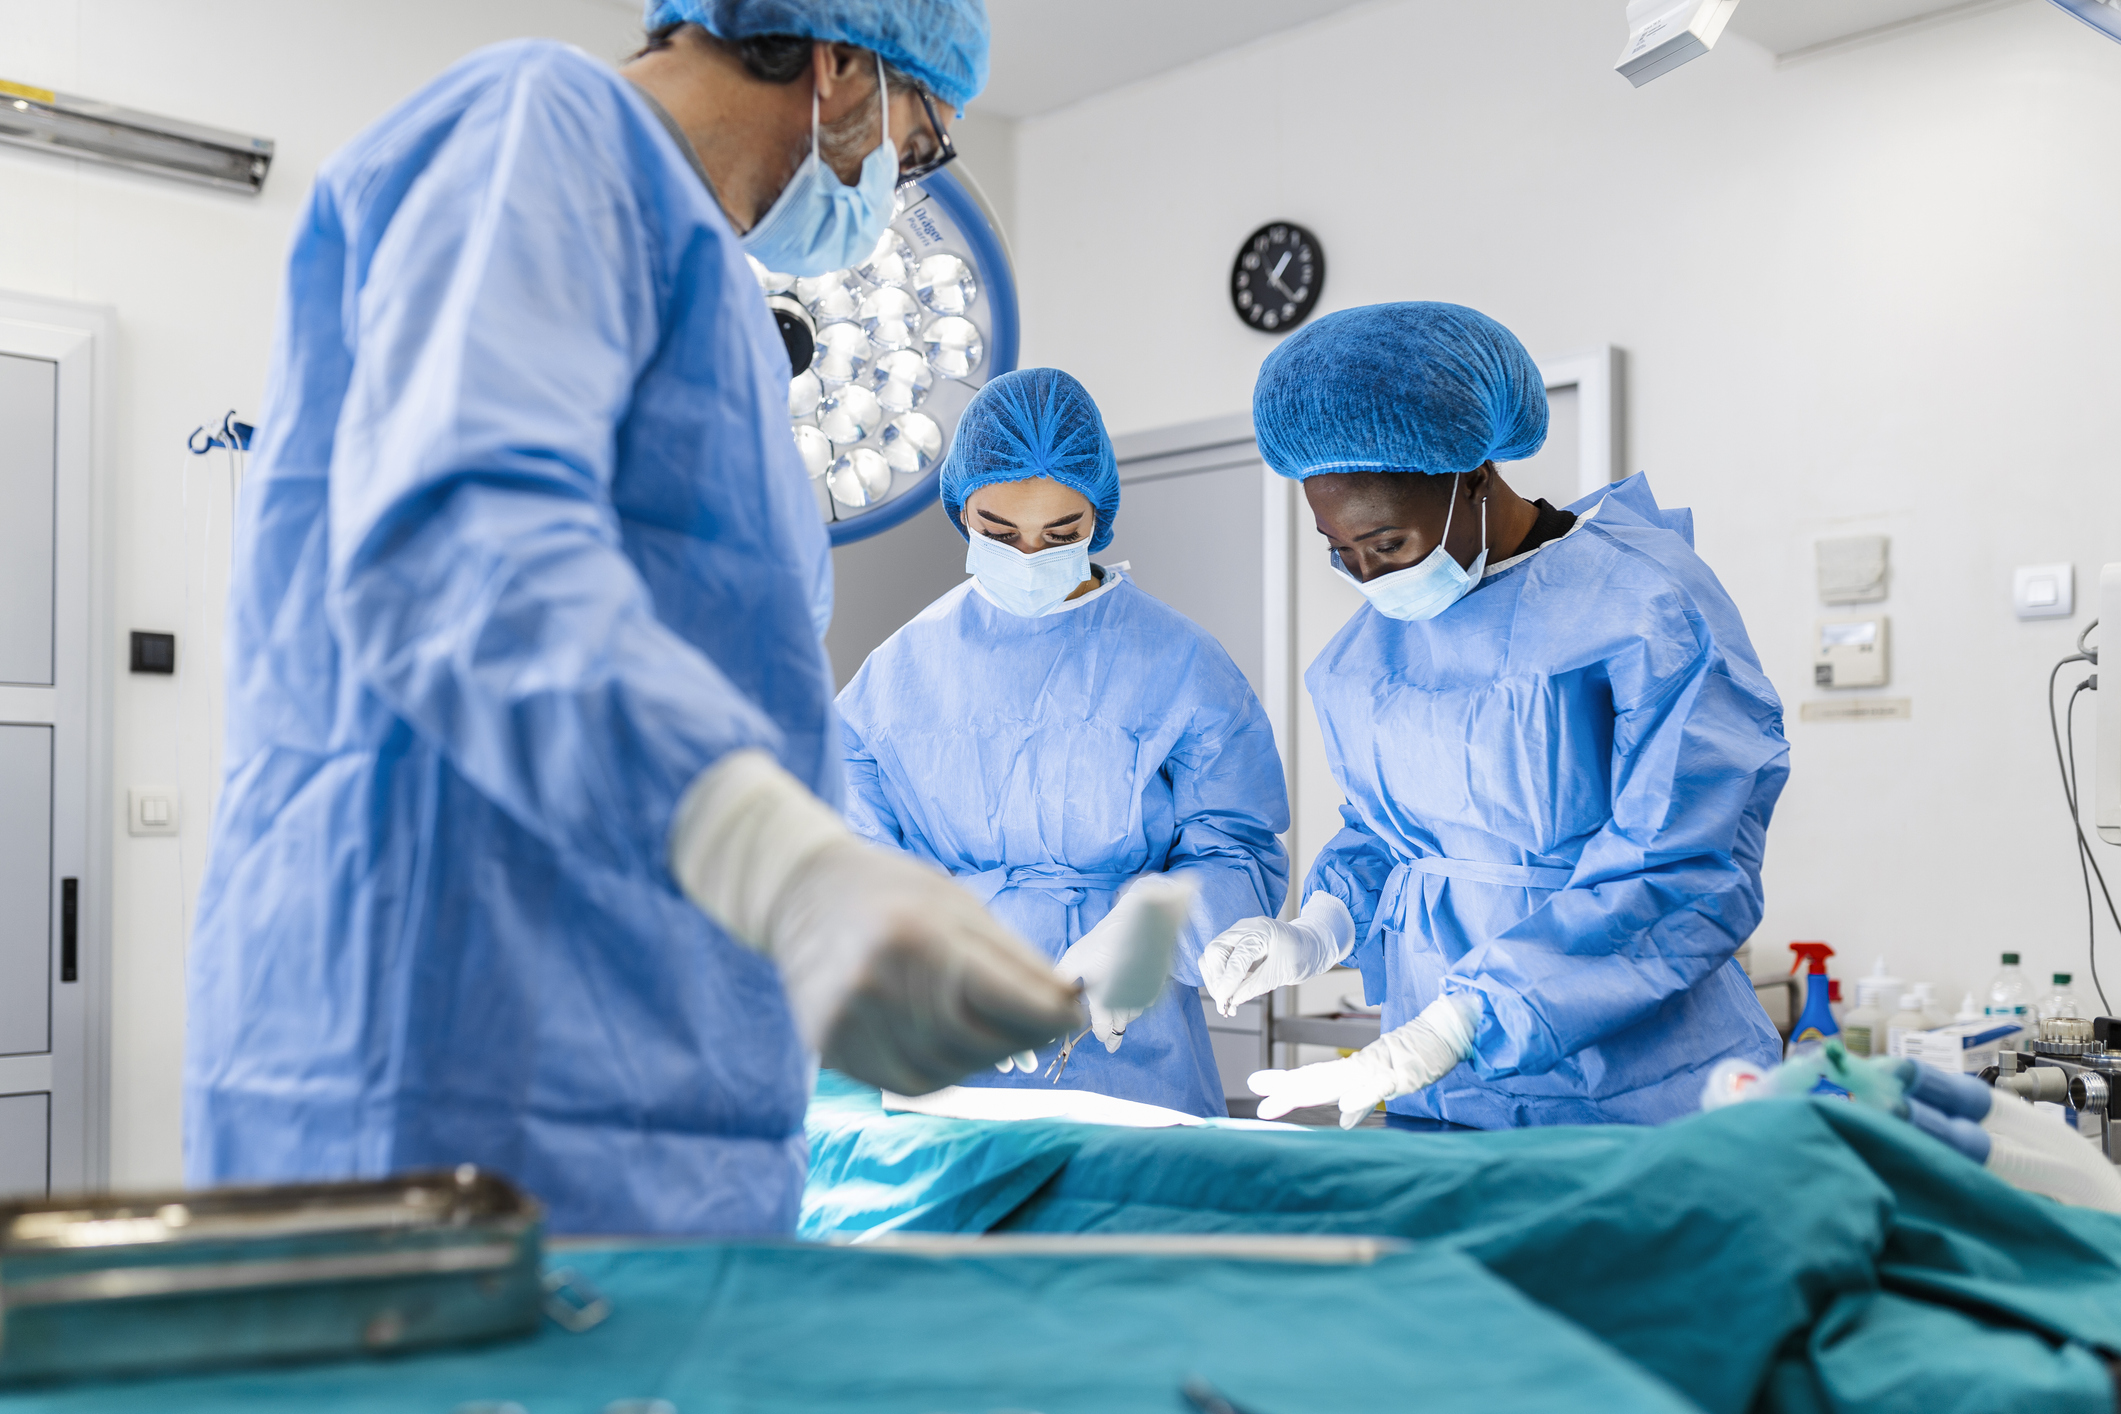 Operating Room of Surgical Table with Instruments, Assistant Picks up Instruments for Surgeons During Operation. Surgery in Progress. Professional Medical Doctors Performing Surgery